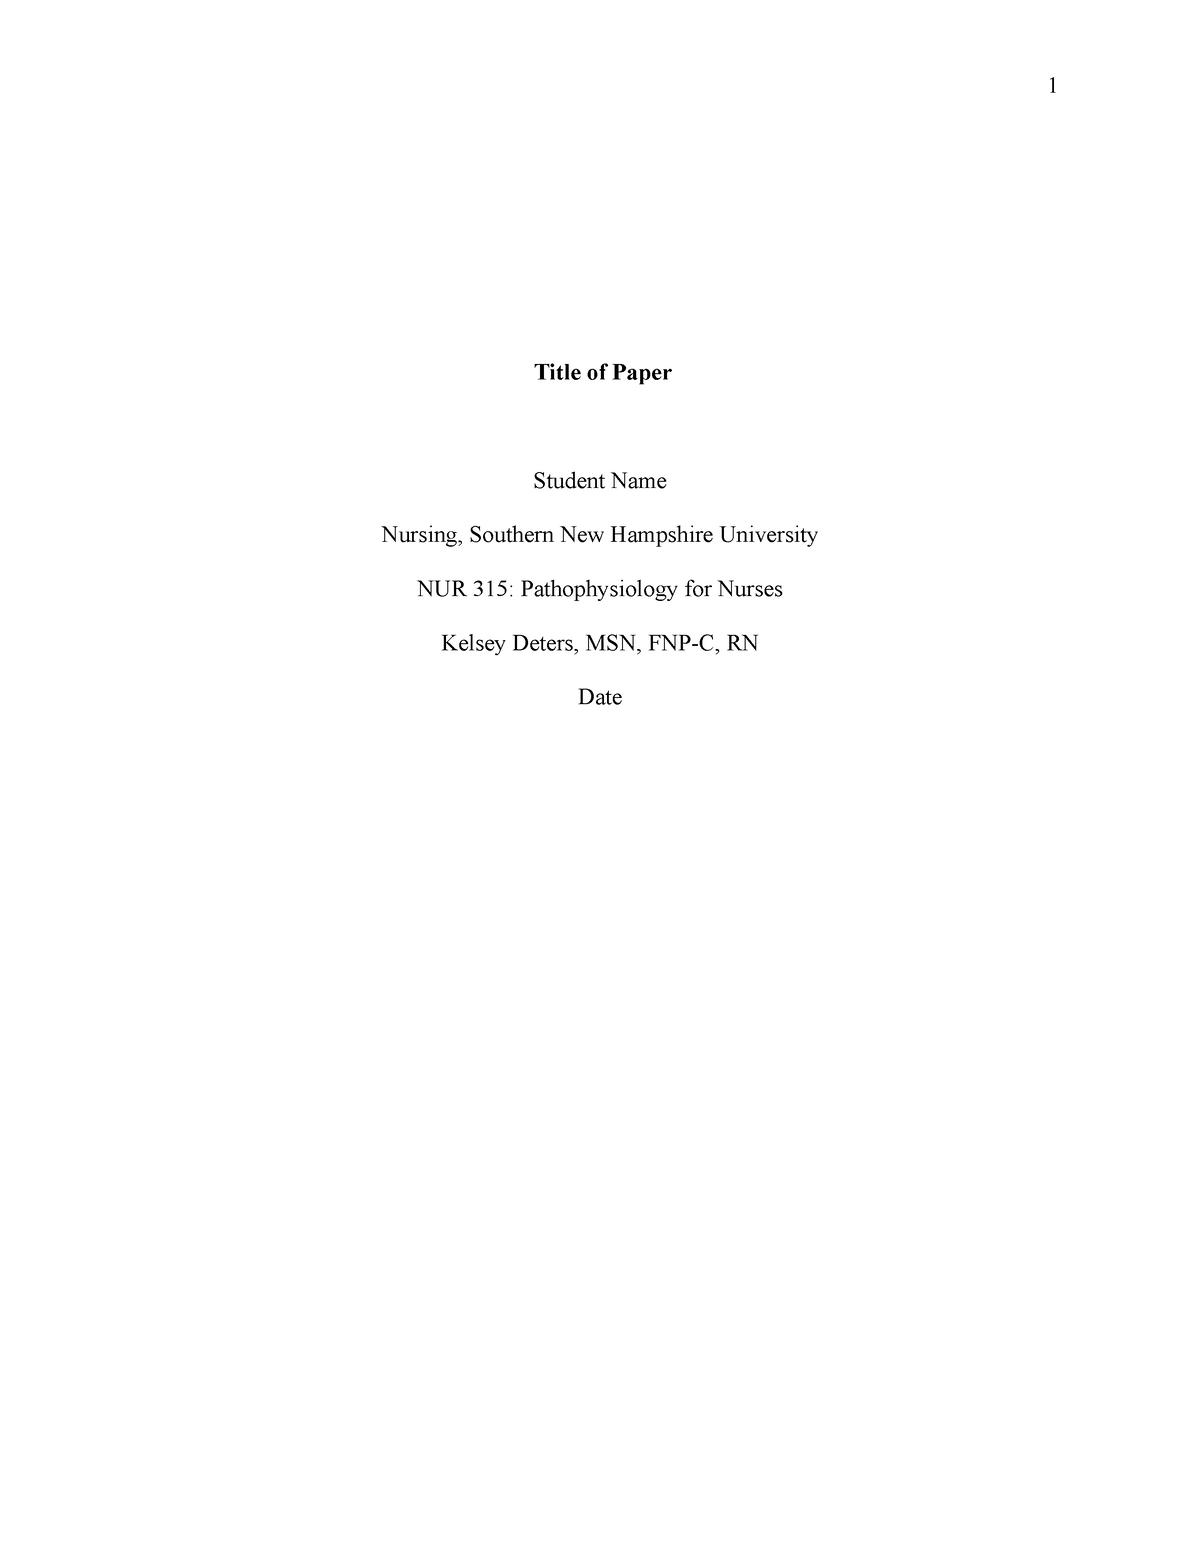 case-study-apa-7-template-2-title-of-paper-student-name-nursing-southern-new-hampshire